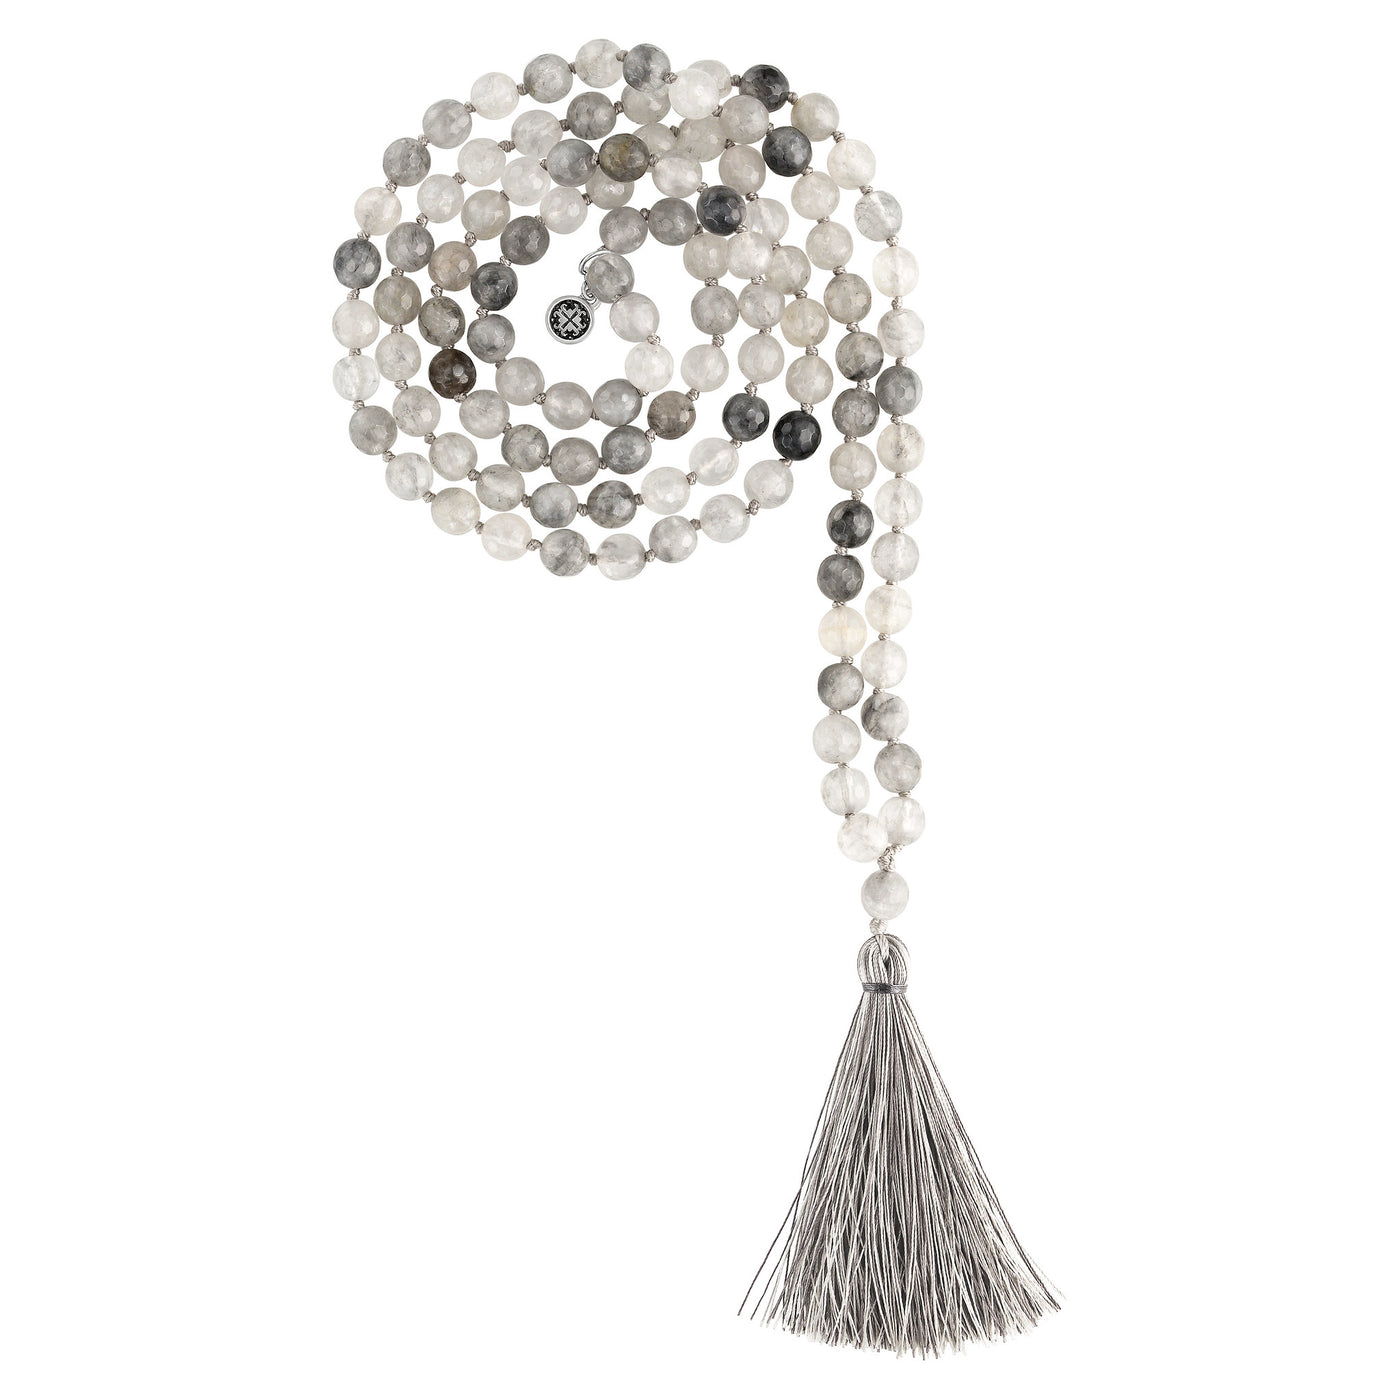 AWARENESS: Silver Grey Quartz Faceted 108 bead Hand-knotted Mala 8mm